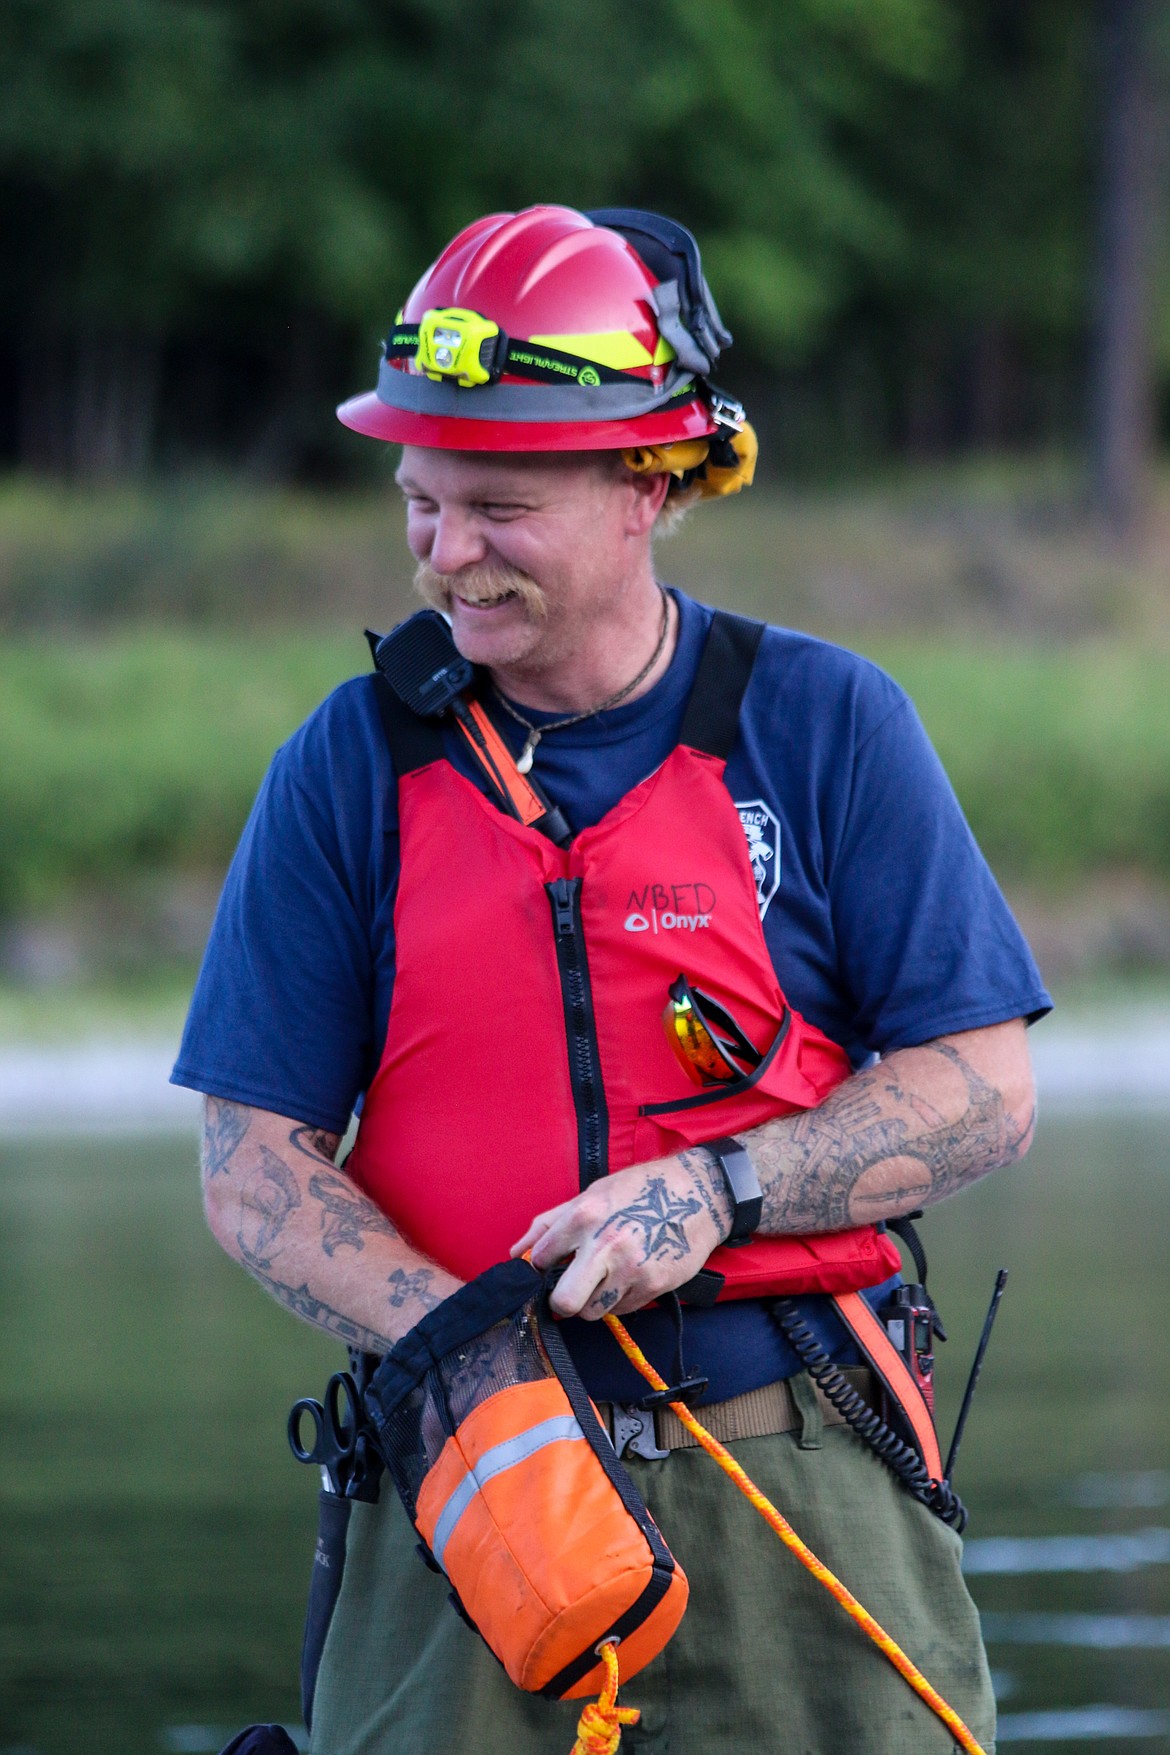 Photo by MANDI BATEMAN 
North Bench Firefighter Tom Chaney, known for always having a smile on his face, takes part in river rescue training.